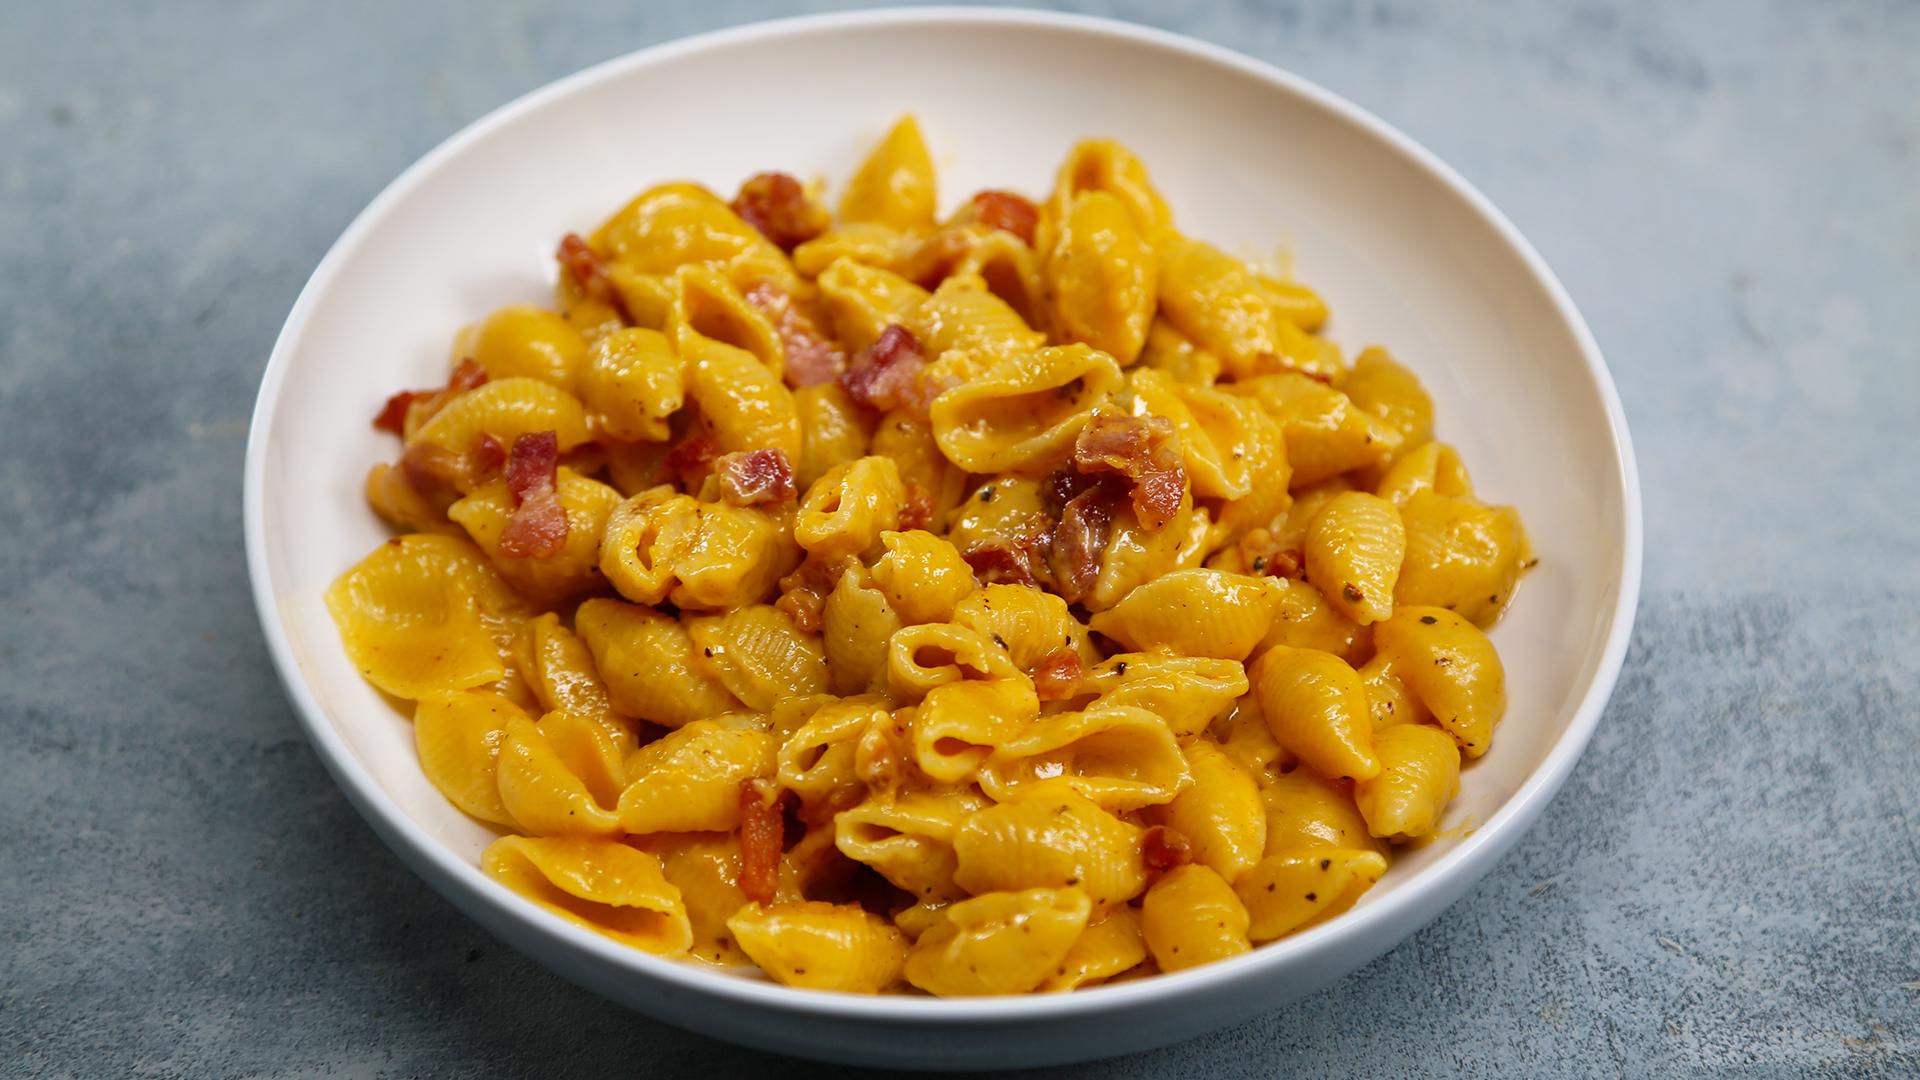 Instant Pot Mac And Cheese With Bacon Recipe Myrecipes.